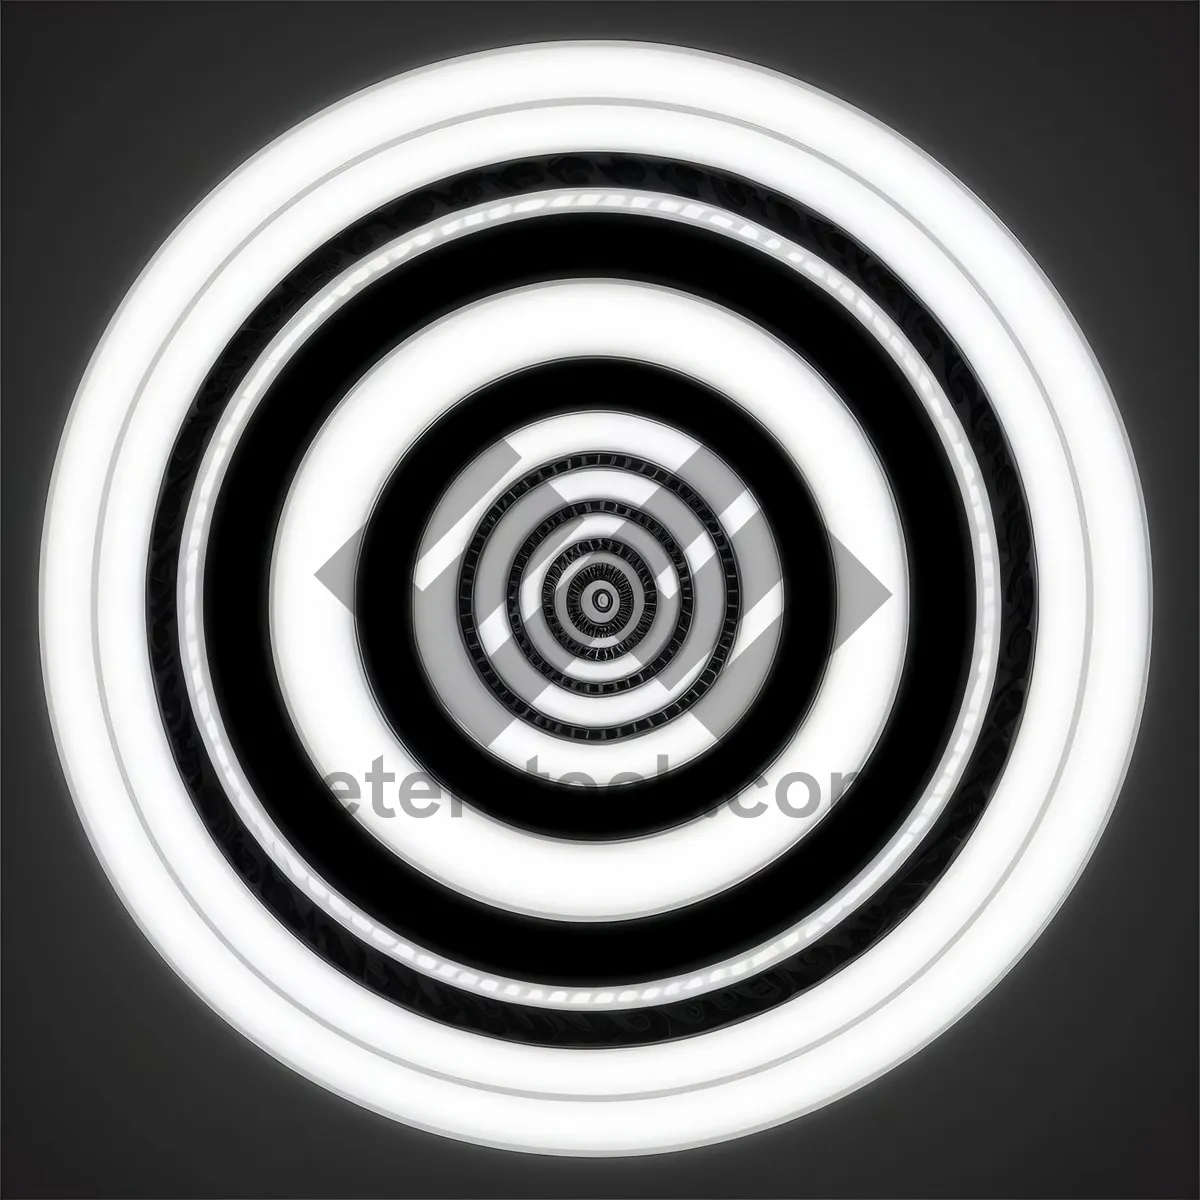 Picture of Relief Design: Artistic Light Pattern with Graphic Swirl